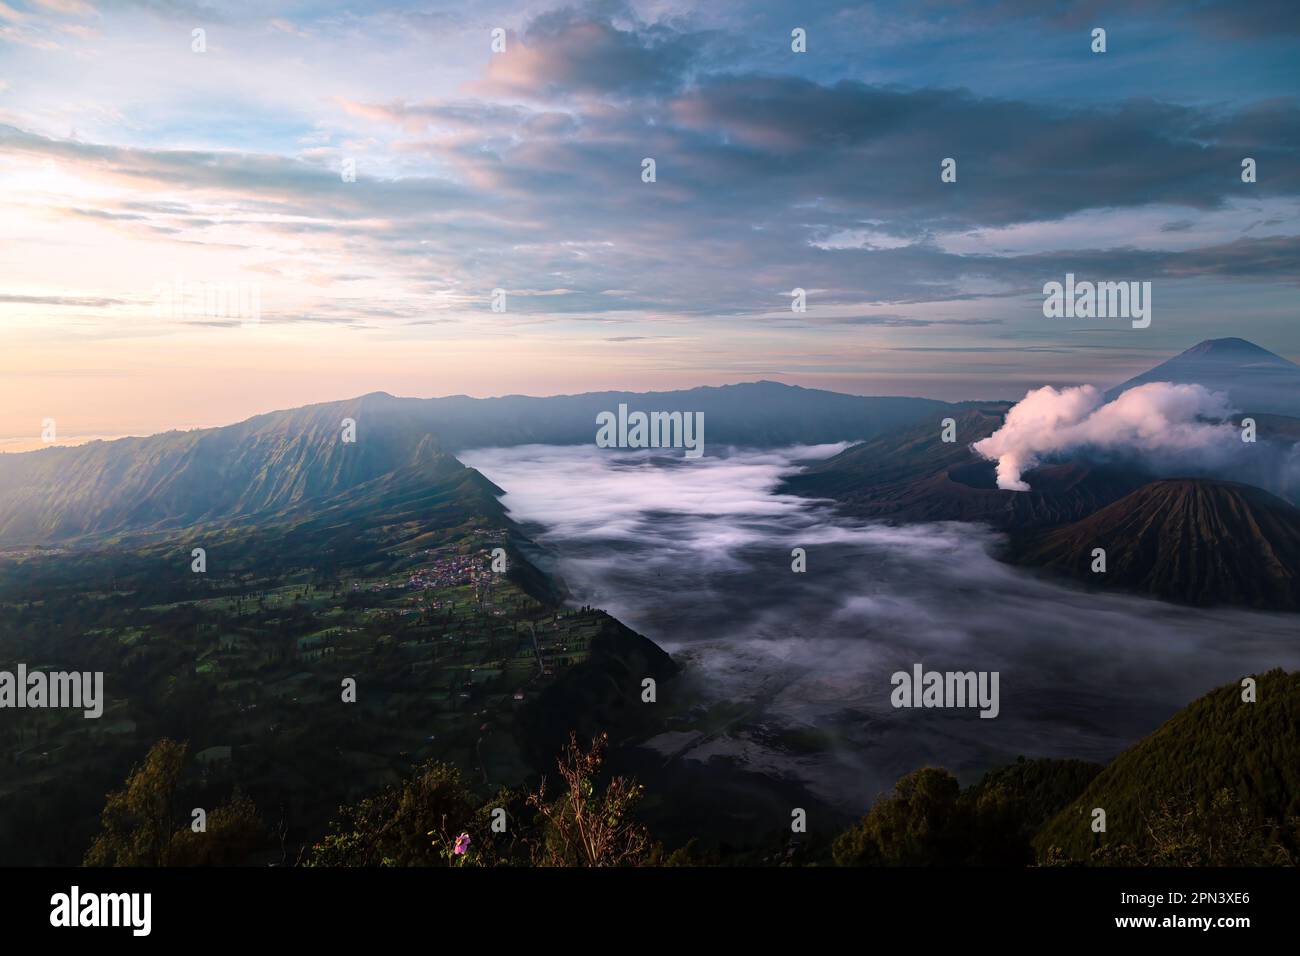 Sunrise over the active volcano Mt. Bromo, East Java, Indonesia, Asia Stock Photo